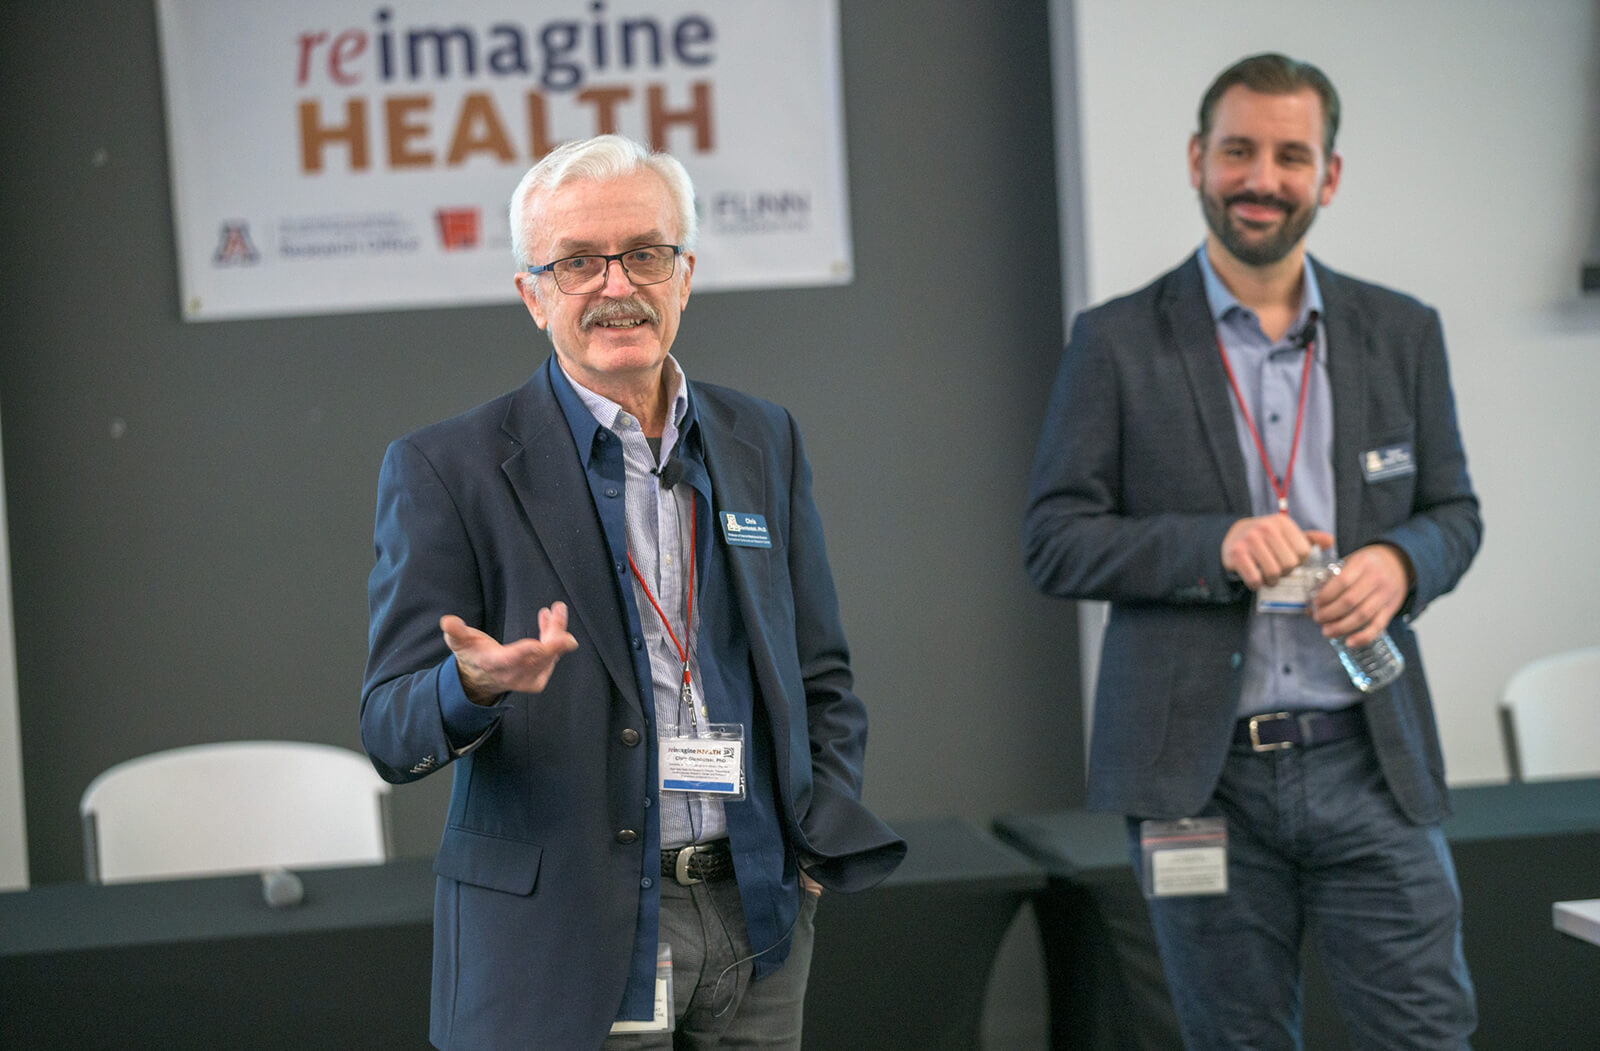 Chris Glembotski, PhD, addresses the attendees of the Fifth Annual reimagine Health Research Symposium